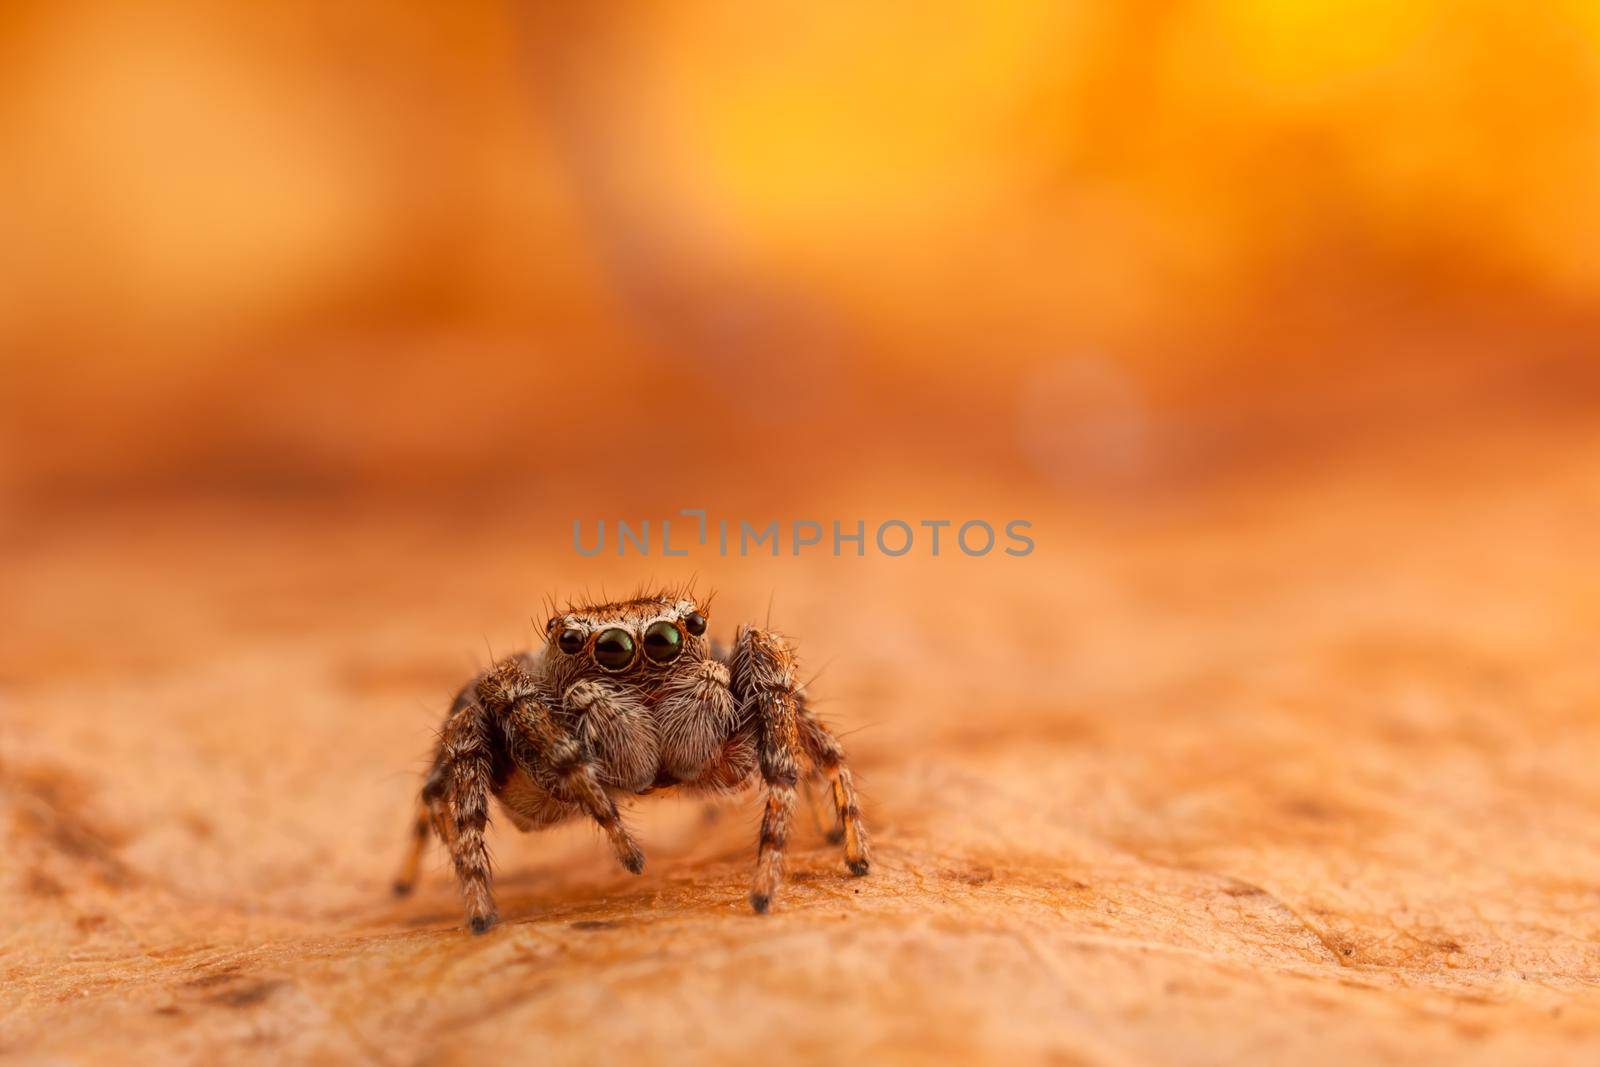 Jumping spider on the orange and shining leaf by Lincikas